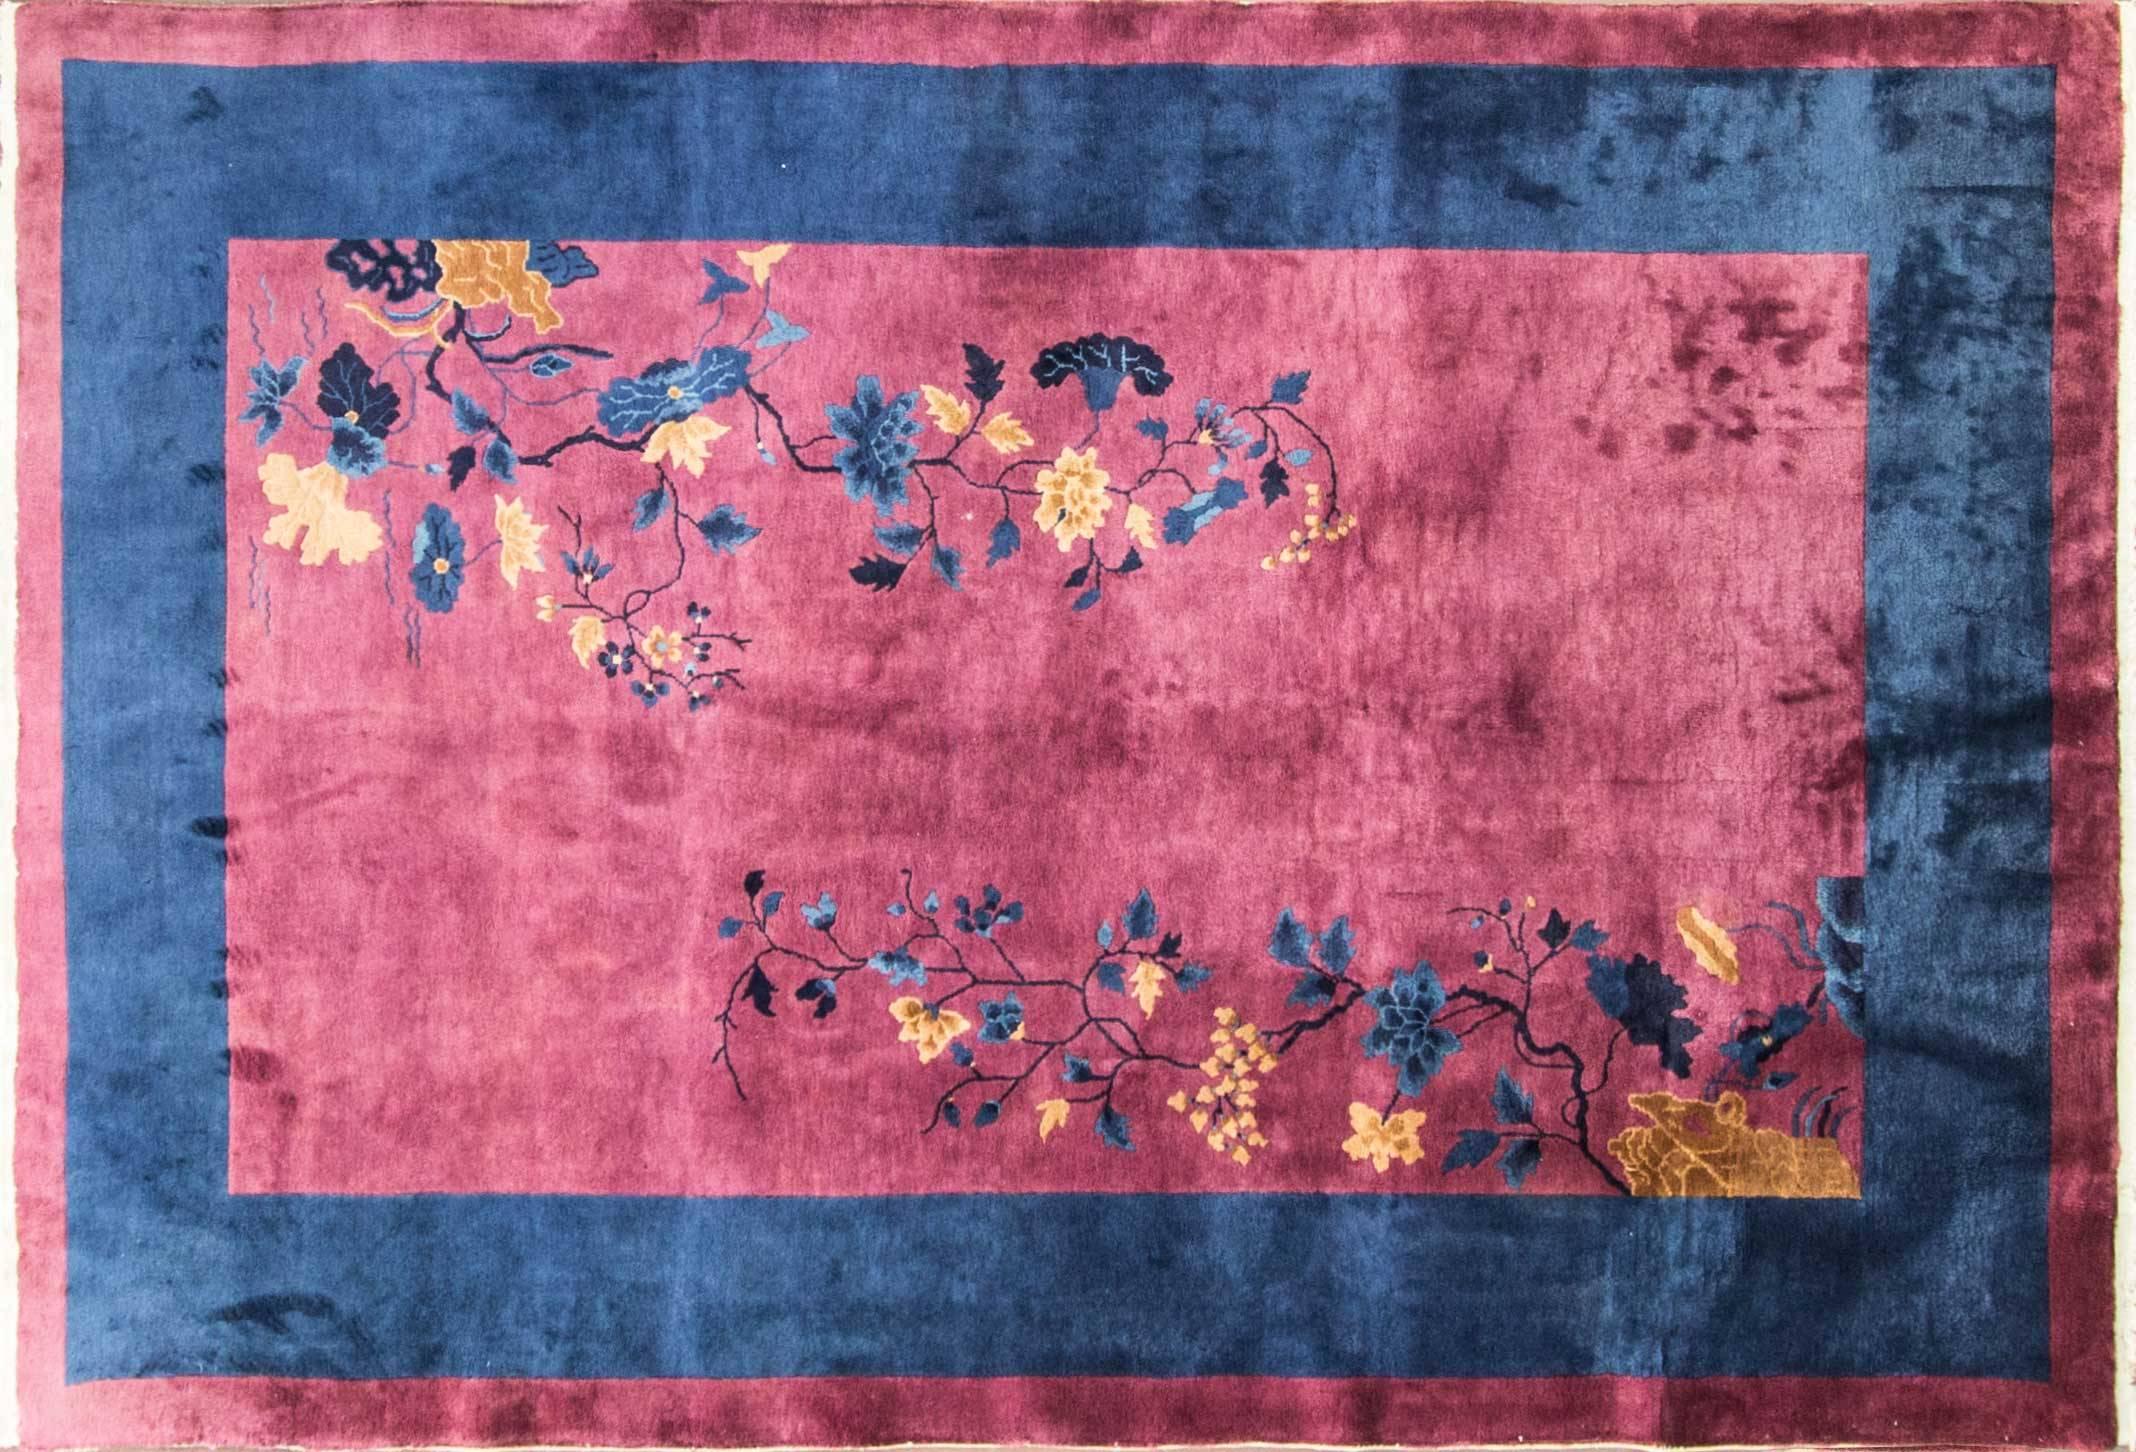 This wonderful Art Deco carpet was made in China, circa 1920s.
Walter Nichols was great American rug producer (the Art Deco rugs which he did not originate them) in Tientsin. The rugs made of wool and silk with bold vibrant colors and the pattern